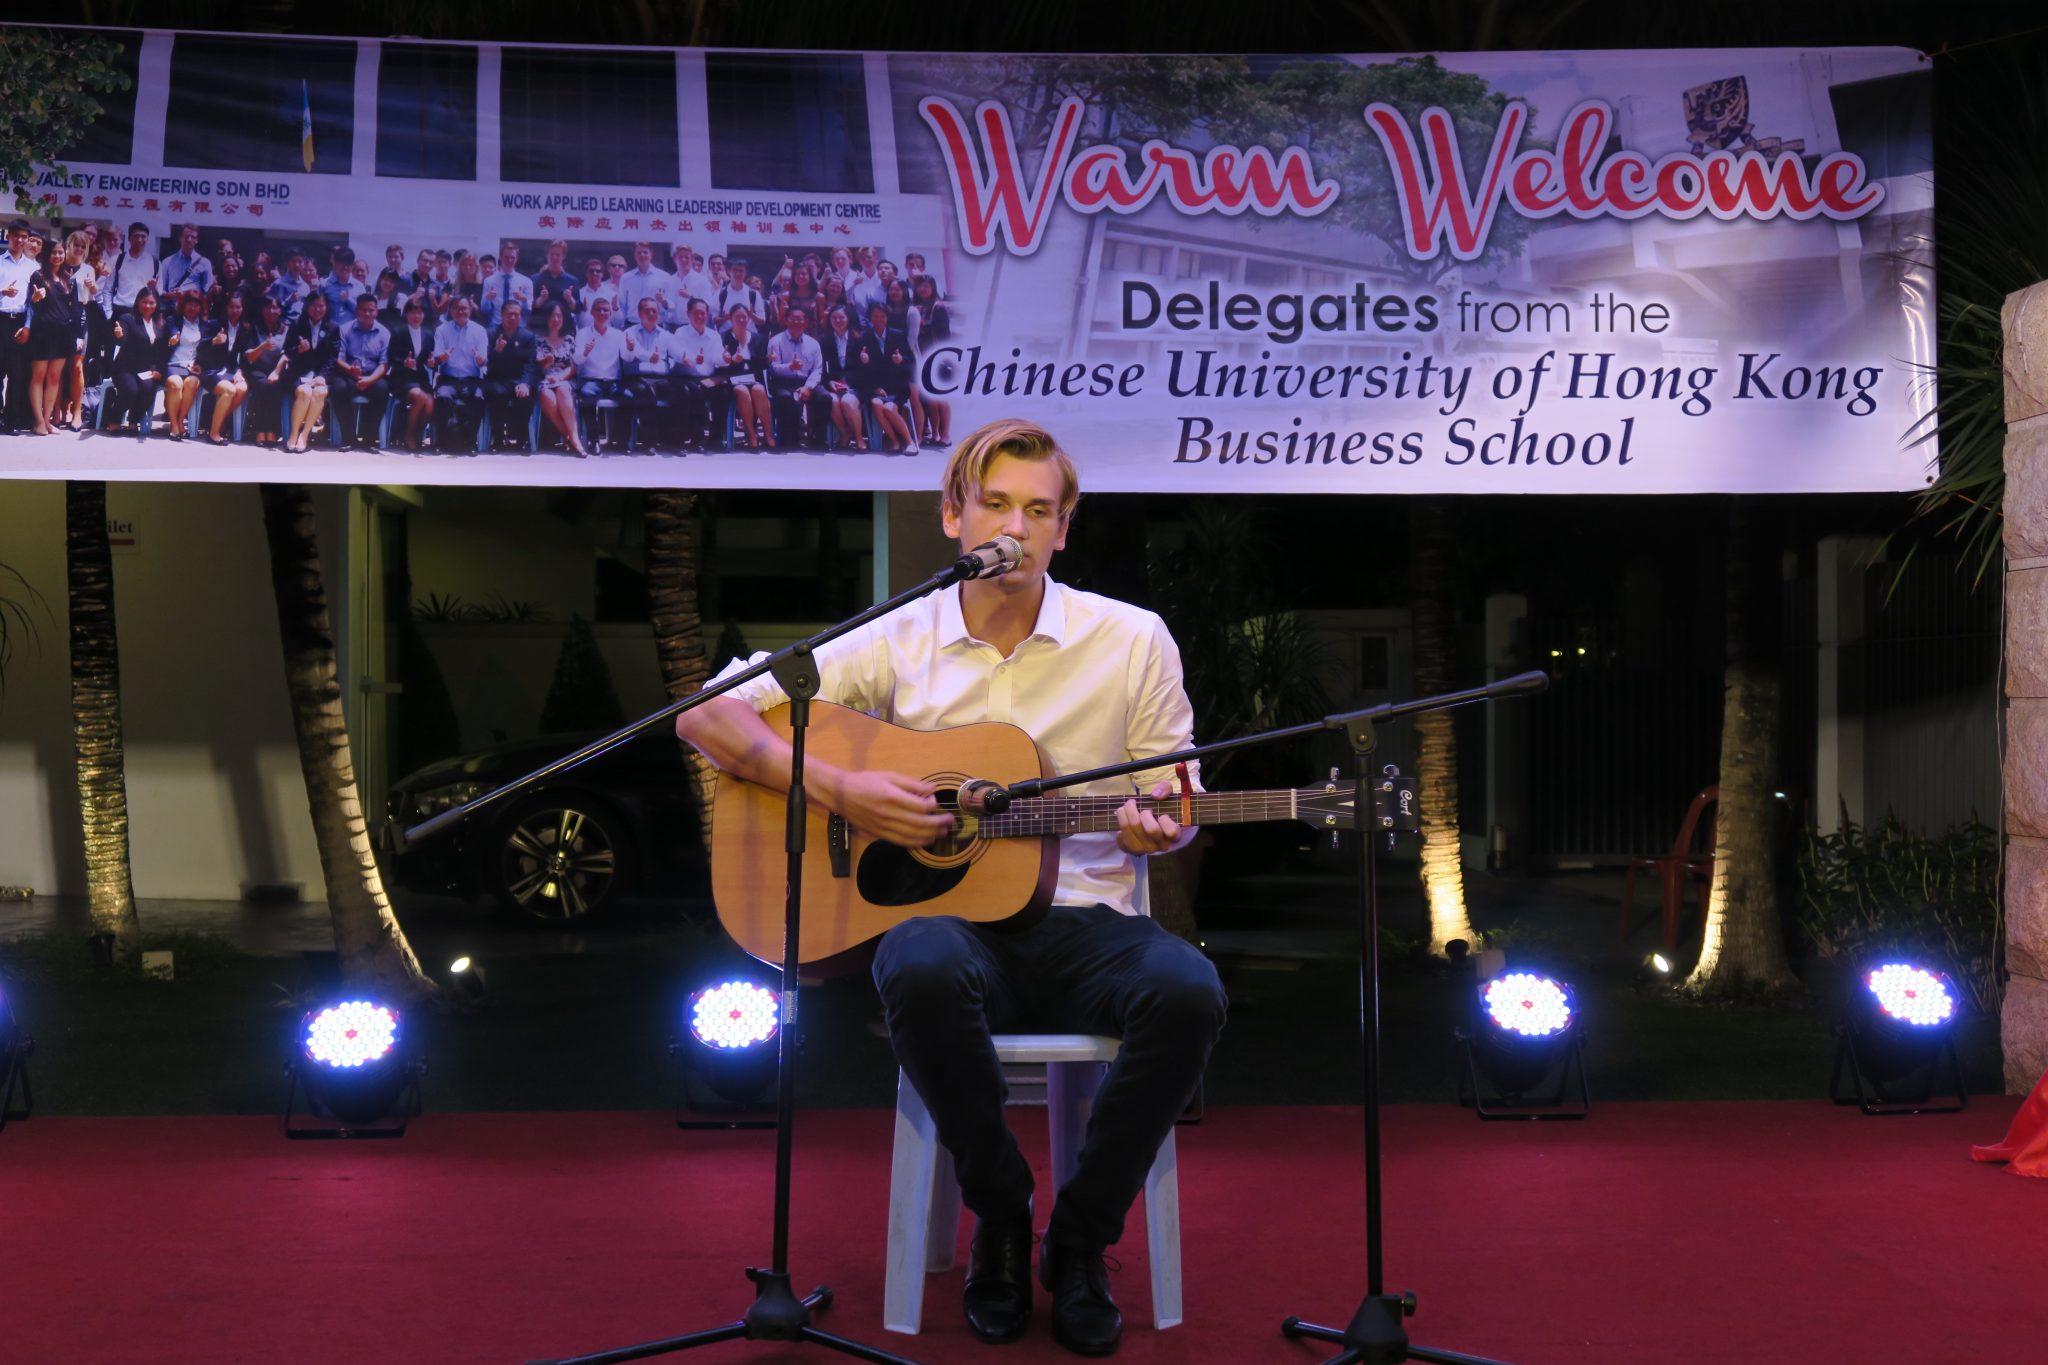 A musical performance by a GLOBE student from Copenhagen Business School in the dinner with Tan Sri Fng.